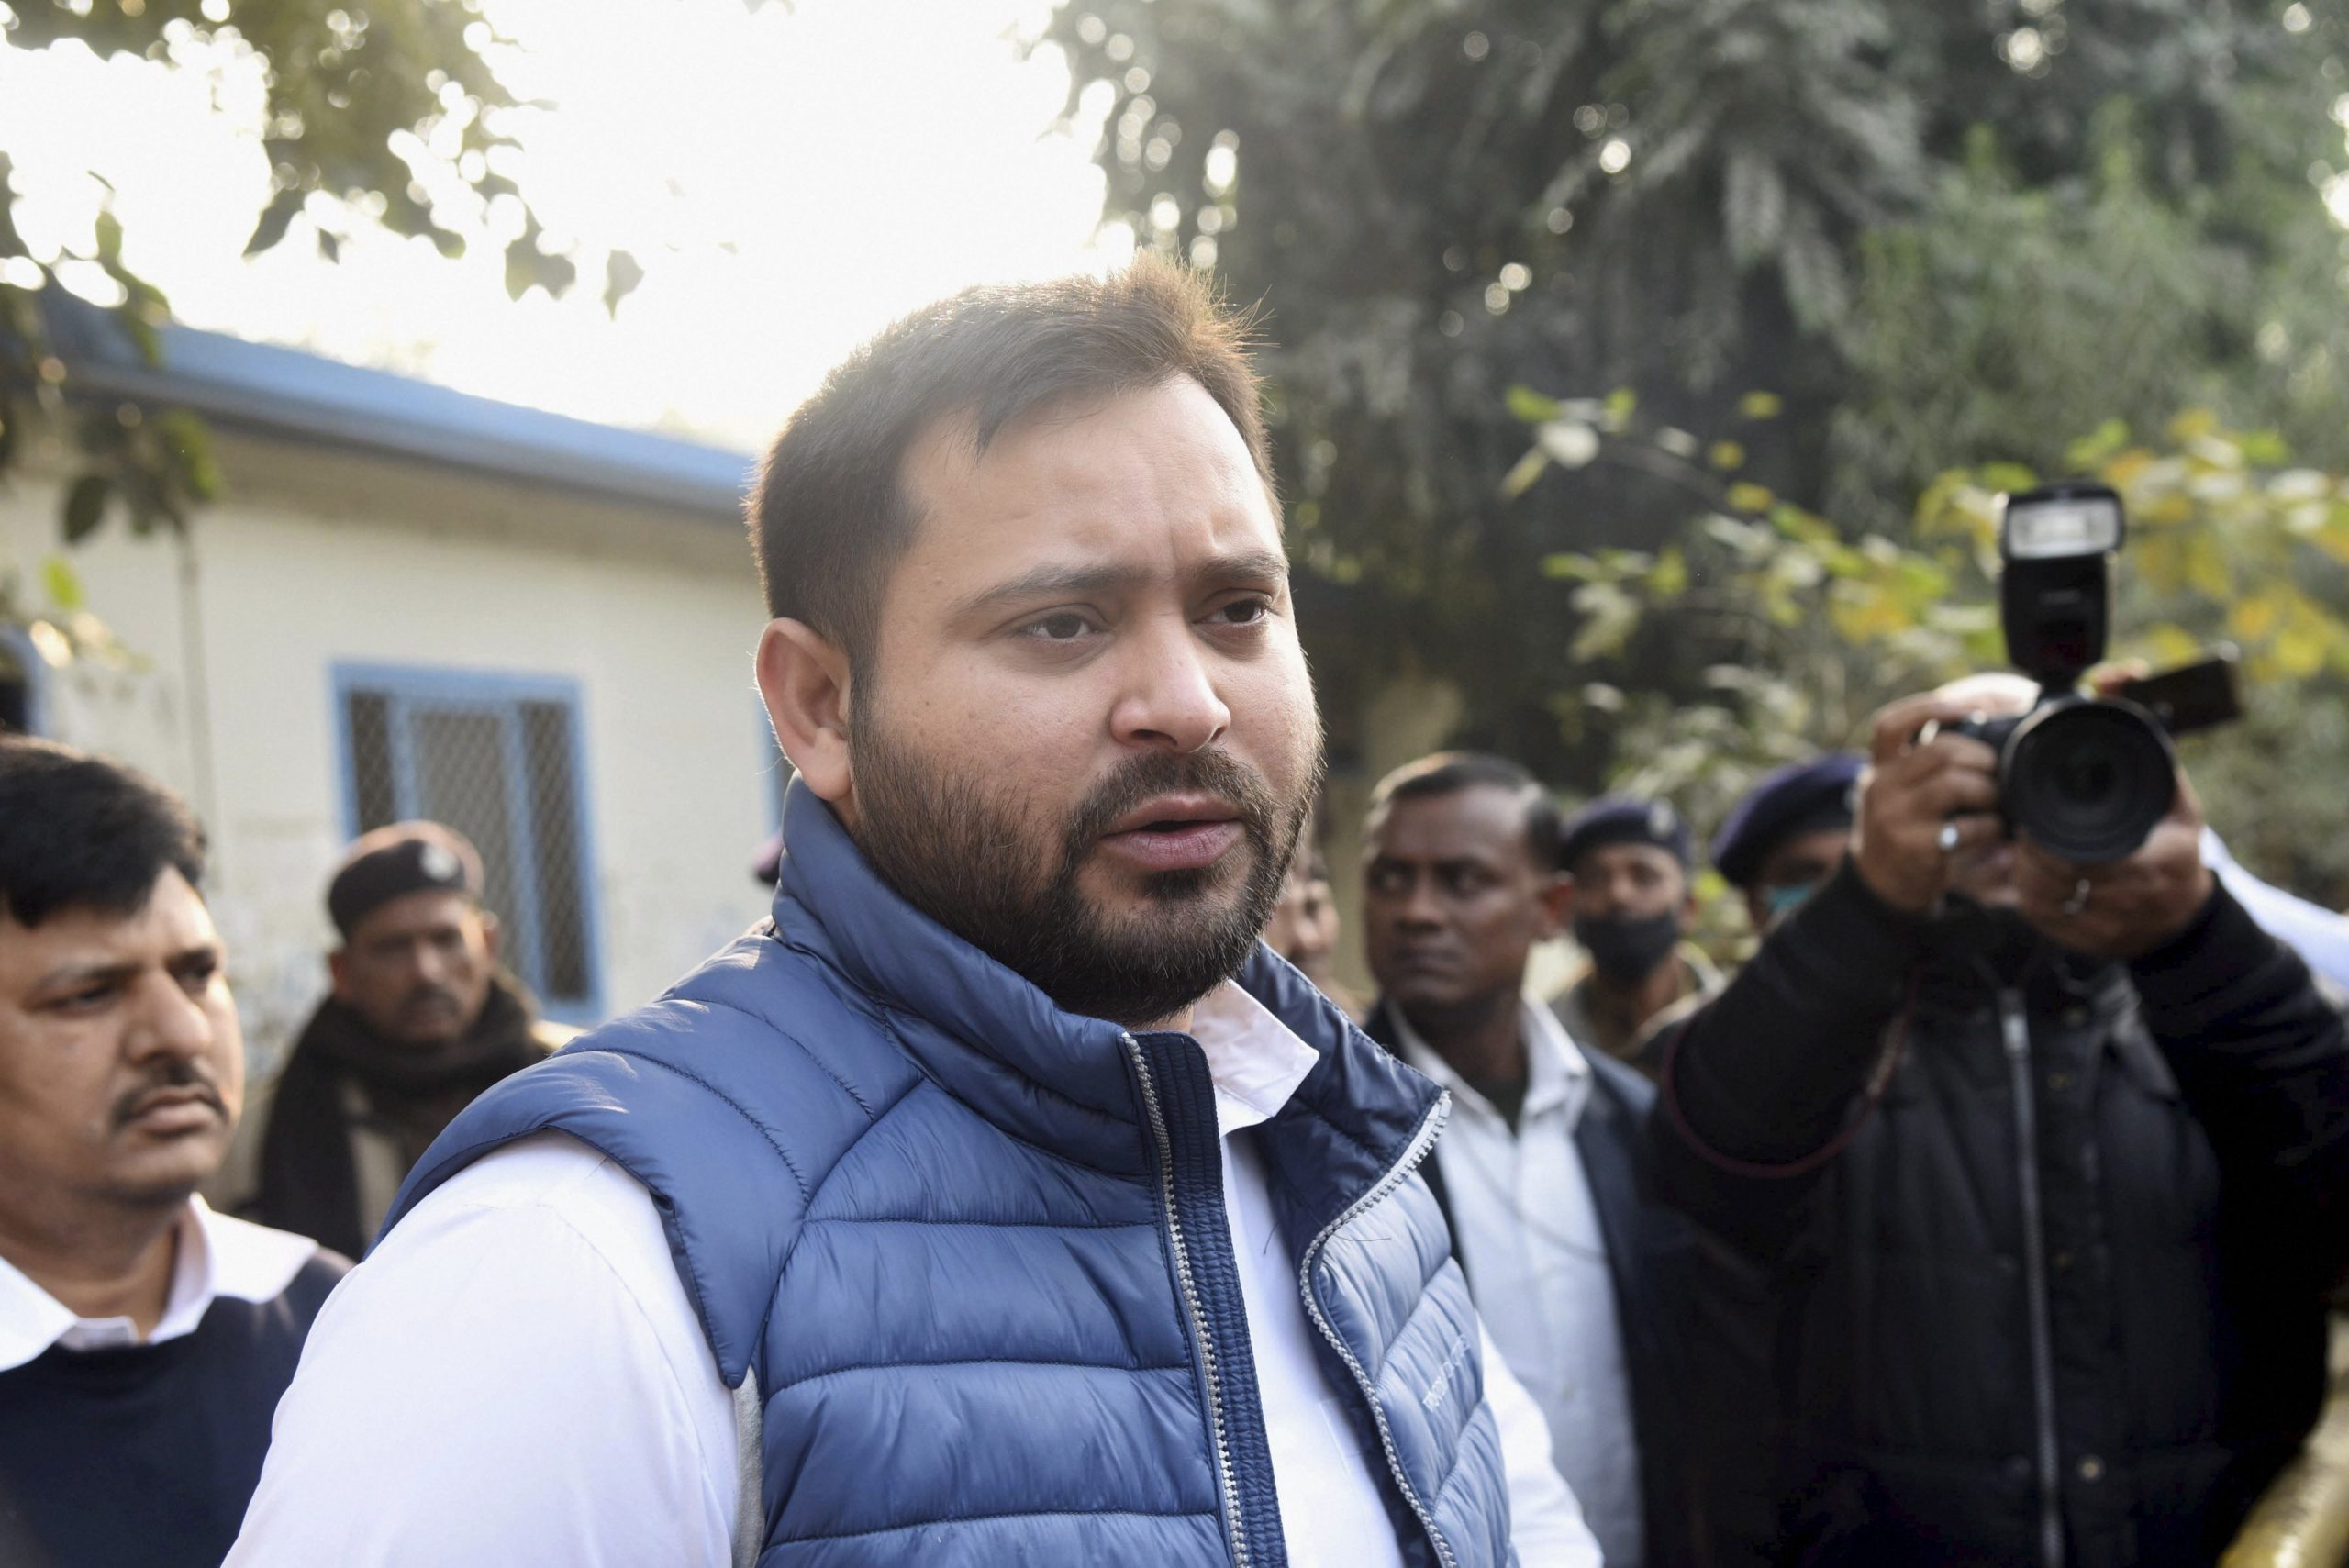 West Bengal Assembly polls: RJD’s Tejashwi Yadav extends ‘support’ to Mamata Banerjee